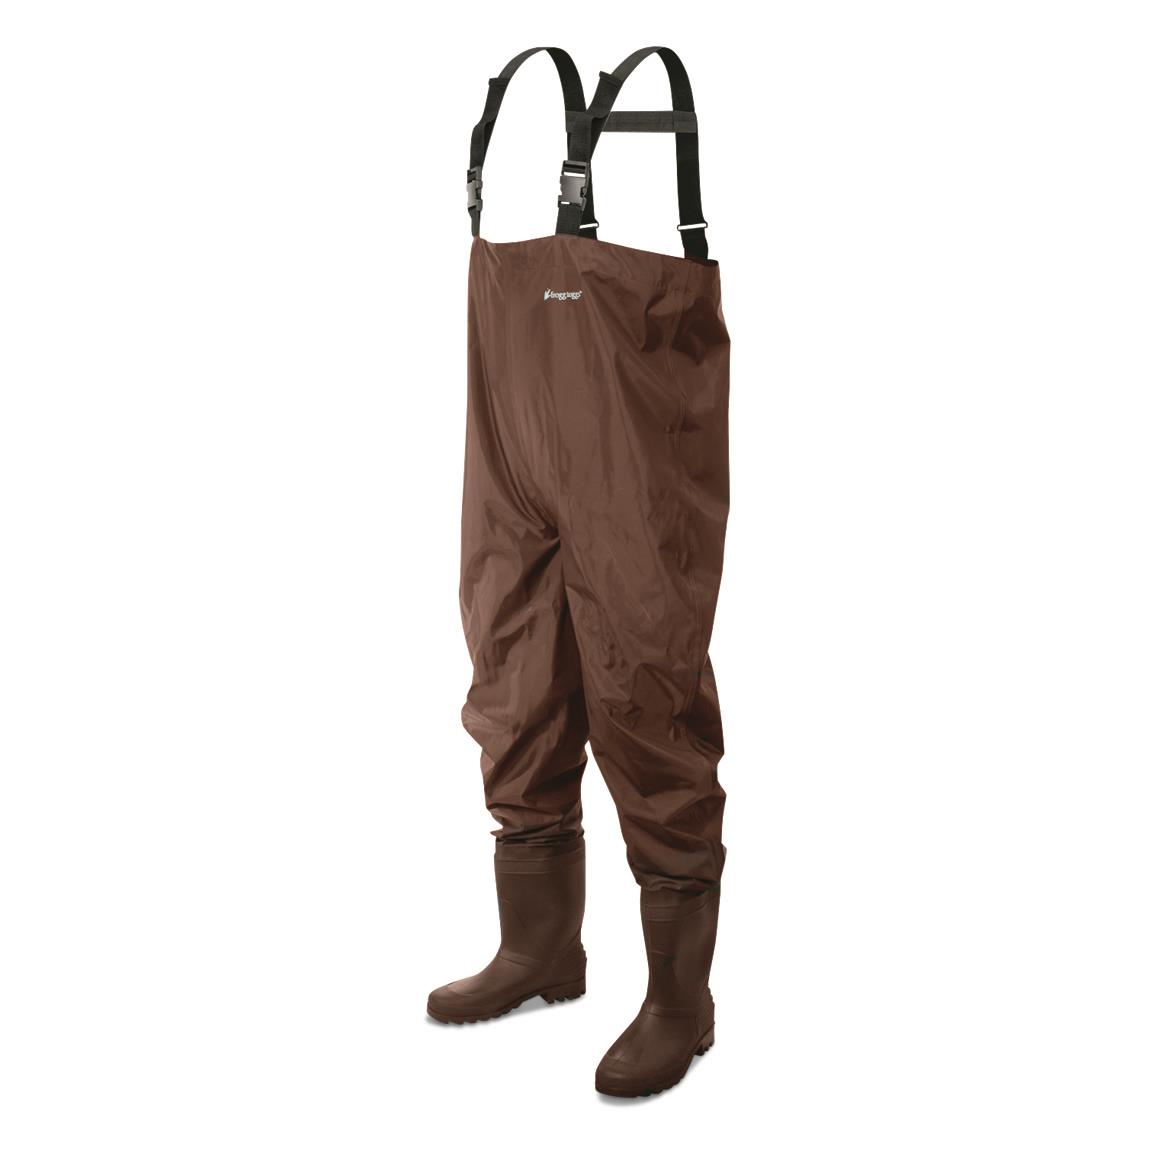 Frogg Toggs Rana II PVC Bootfoot Chest Waders, Brown